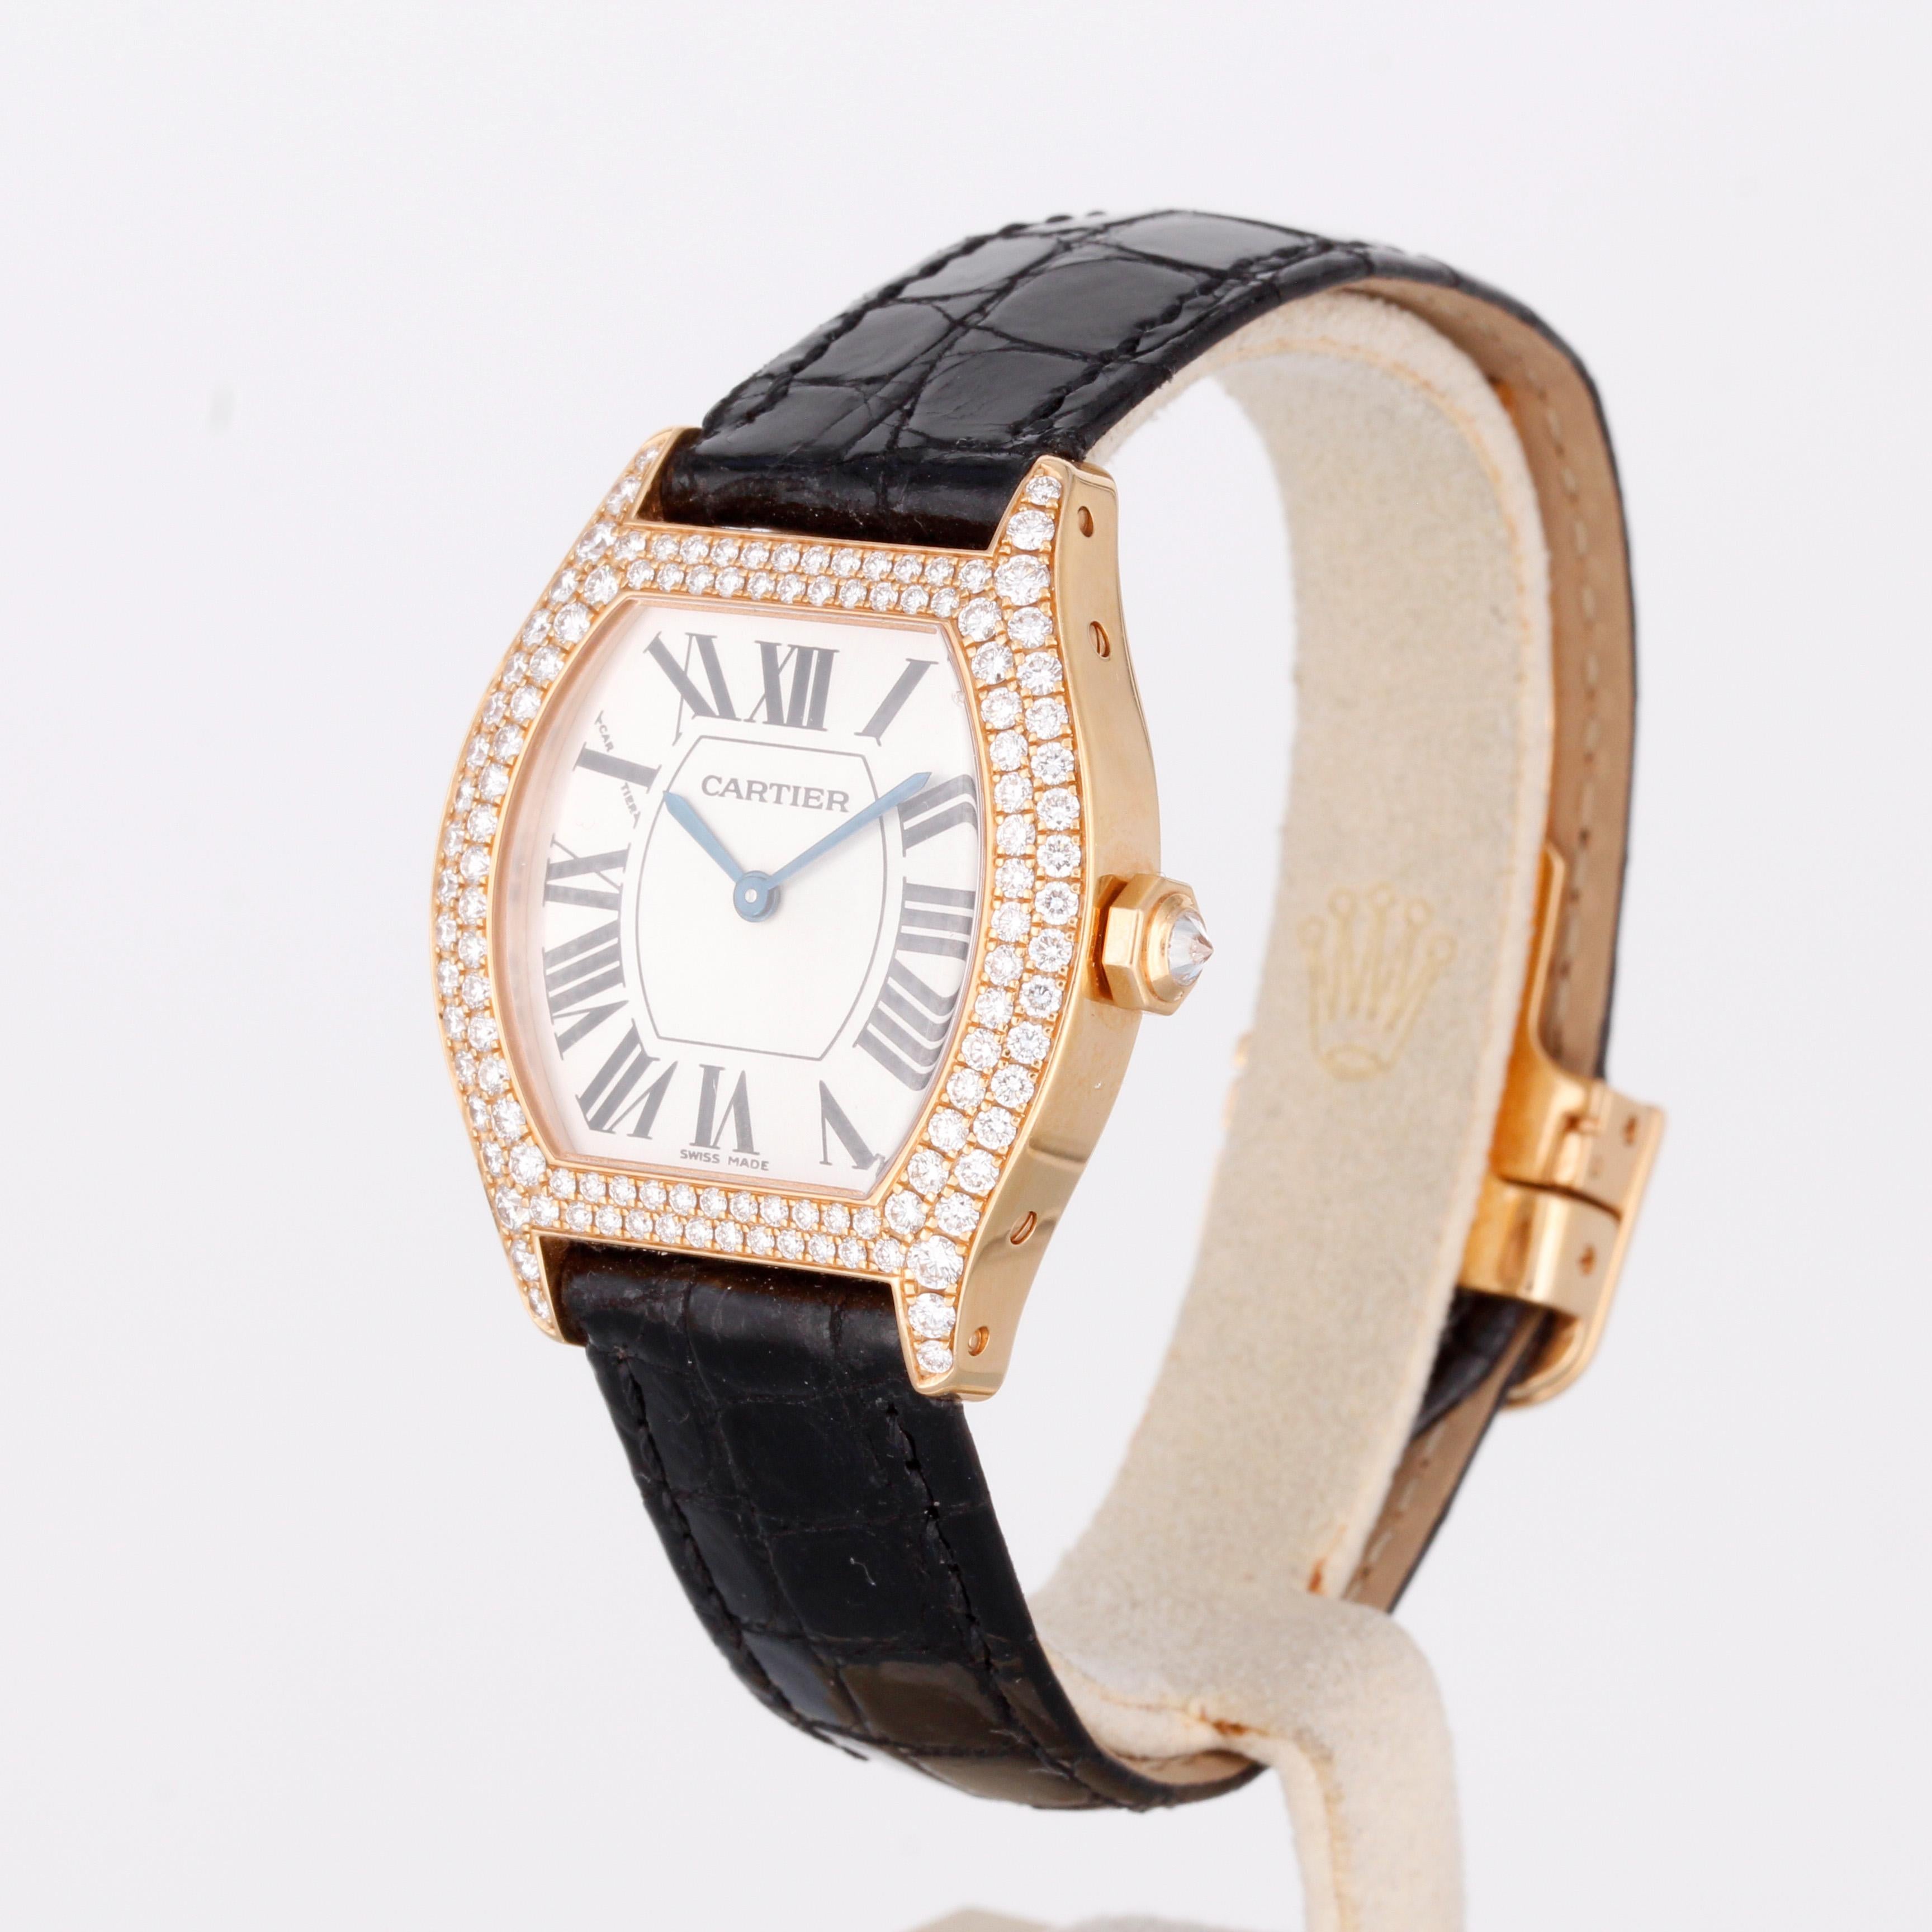 Cartier Tortue Ladies Watch with Diamond Bezel
Reference: WA505031
Material: Yellow gold
Movement: Manual winding
Diameter: 28x34mm
Dial: White
Bracelet: Crocodile leather with an 18ct. yellow gold folding clasp
Diamonds: Original